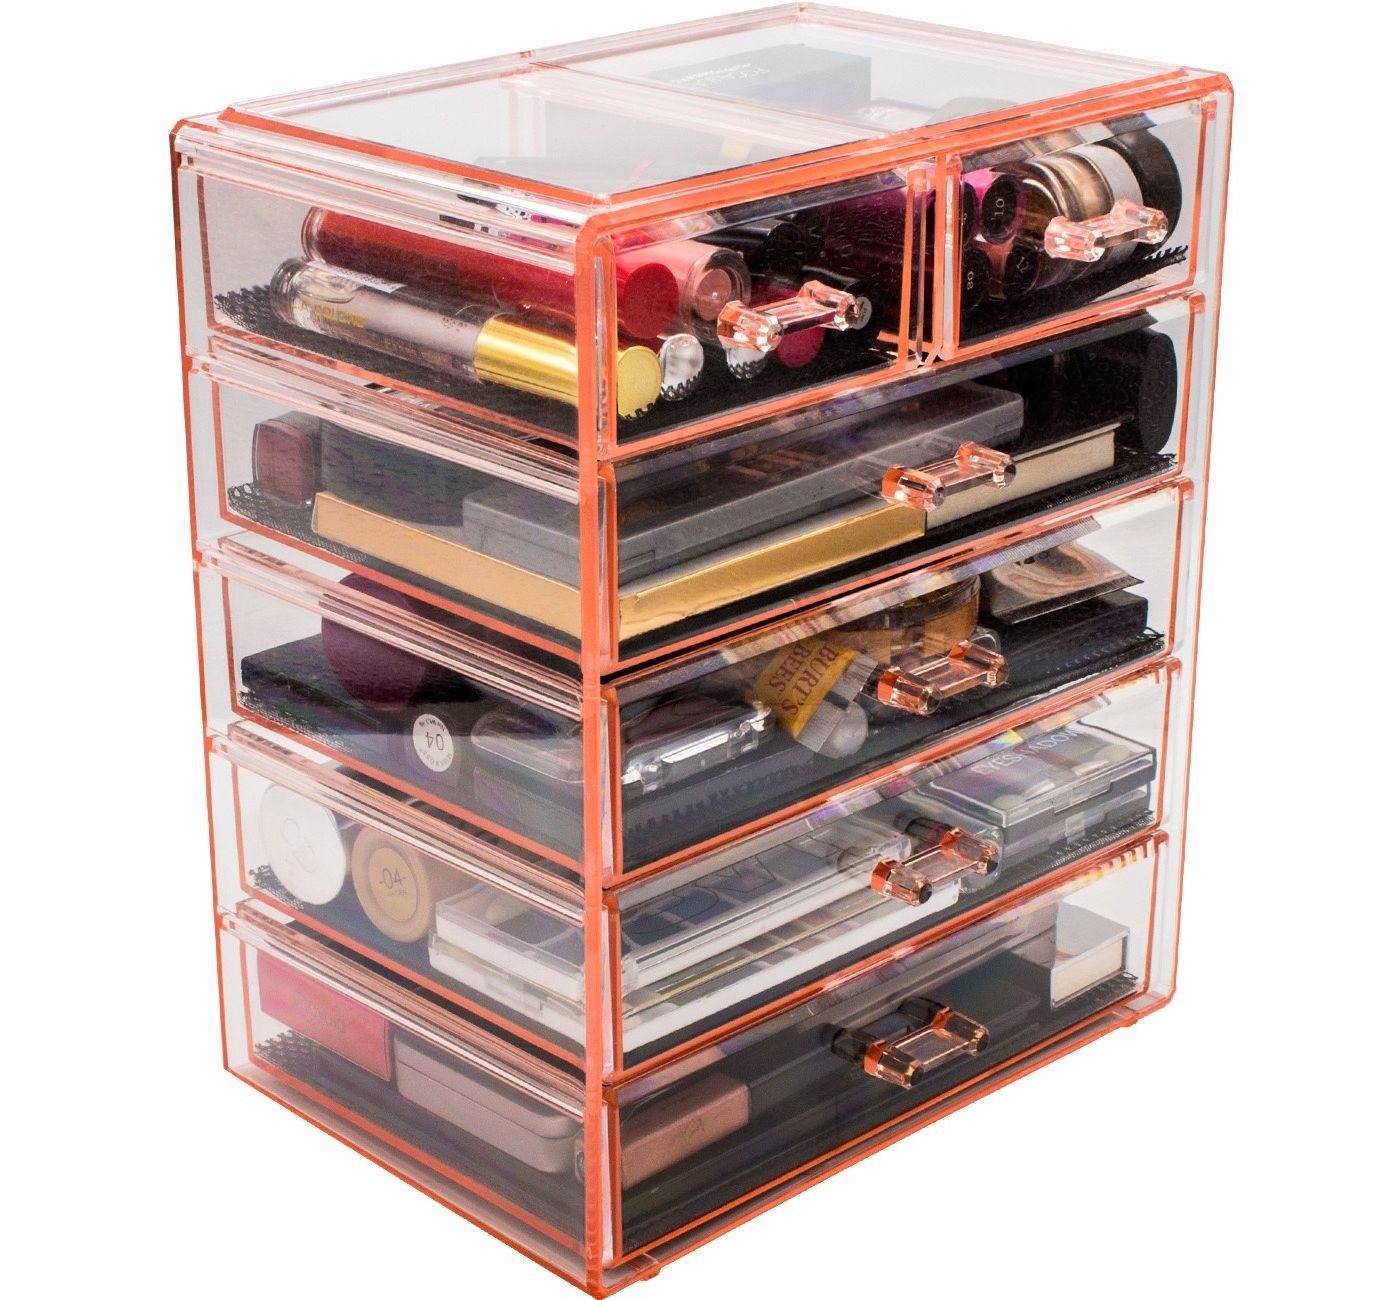 The case display with makeup inside it